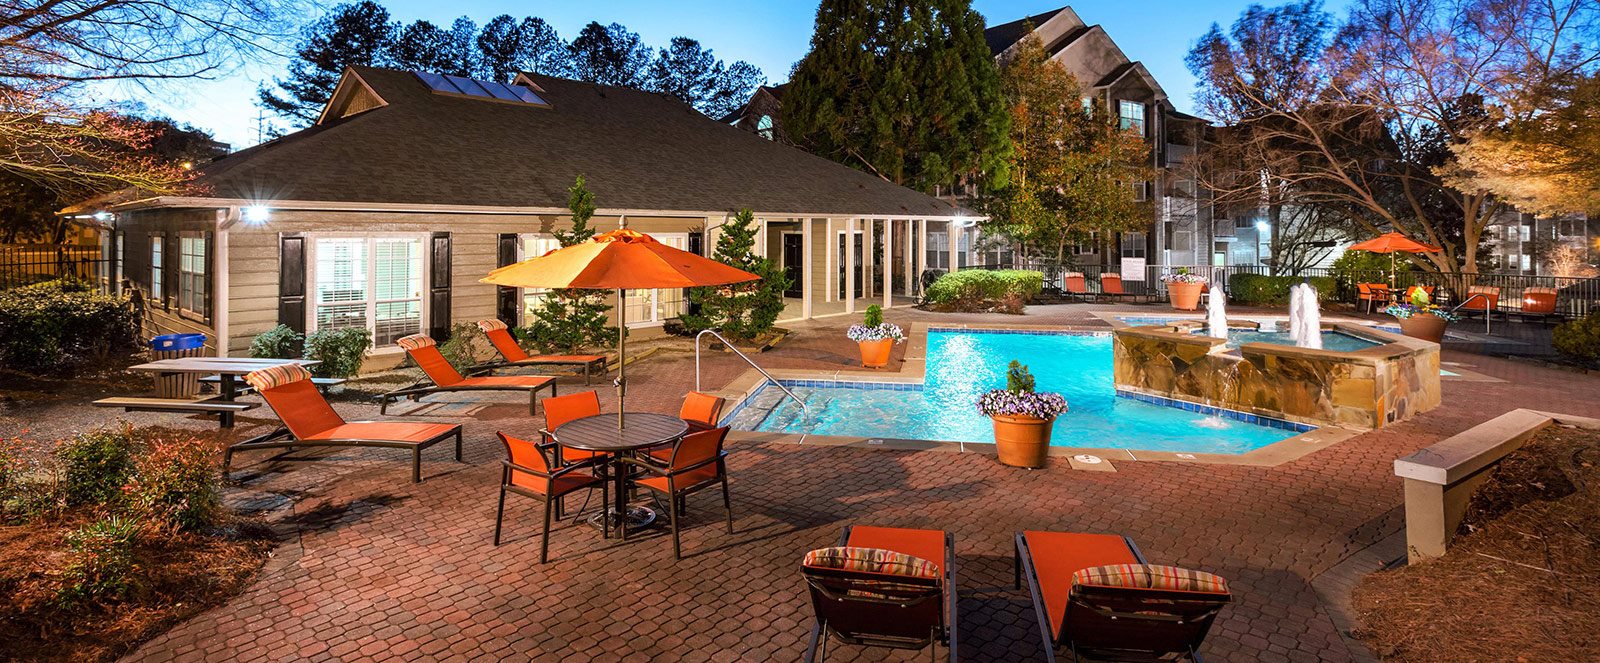 Resort Style Pool with Waterfall Feature and Poolside Wi-Fi Access at Park Summit Apartments, Decatur, GA 30033